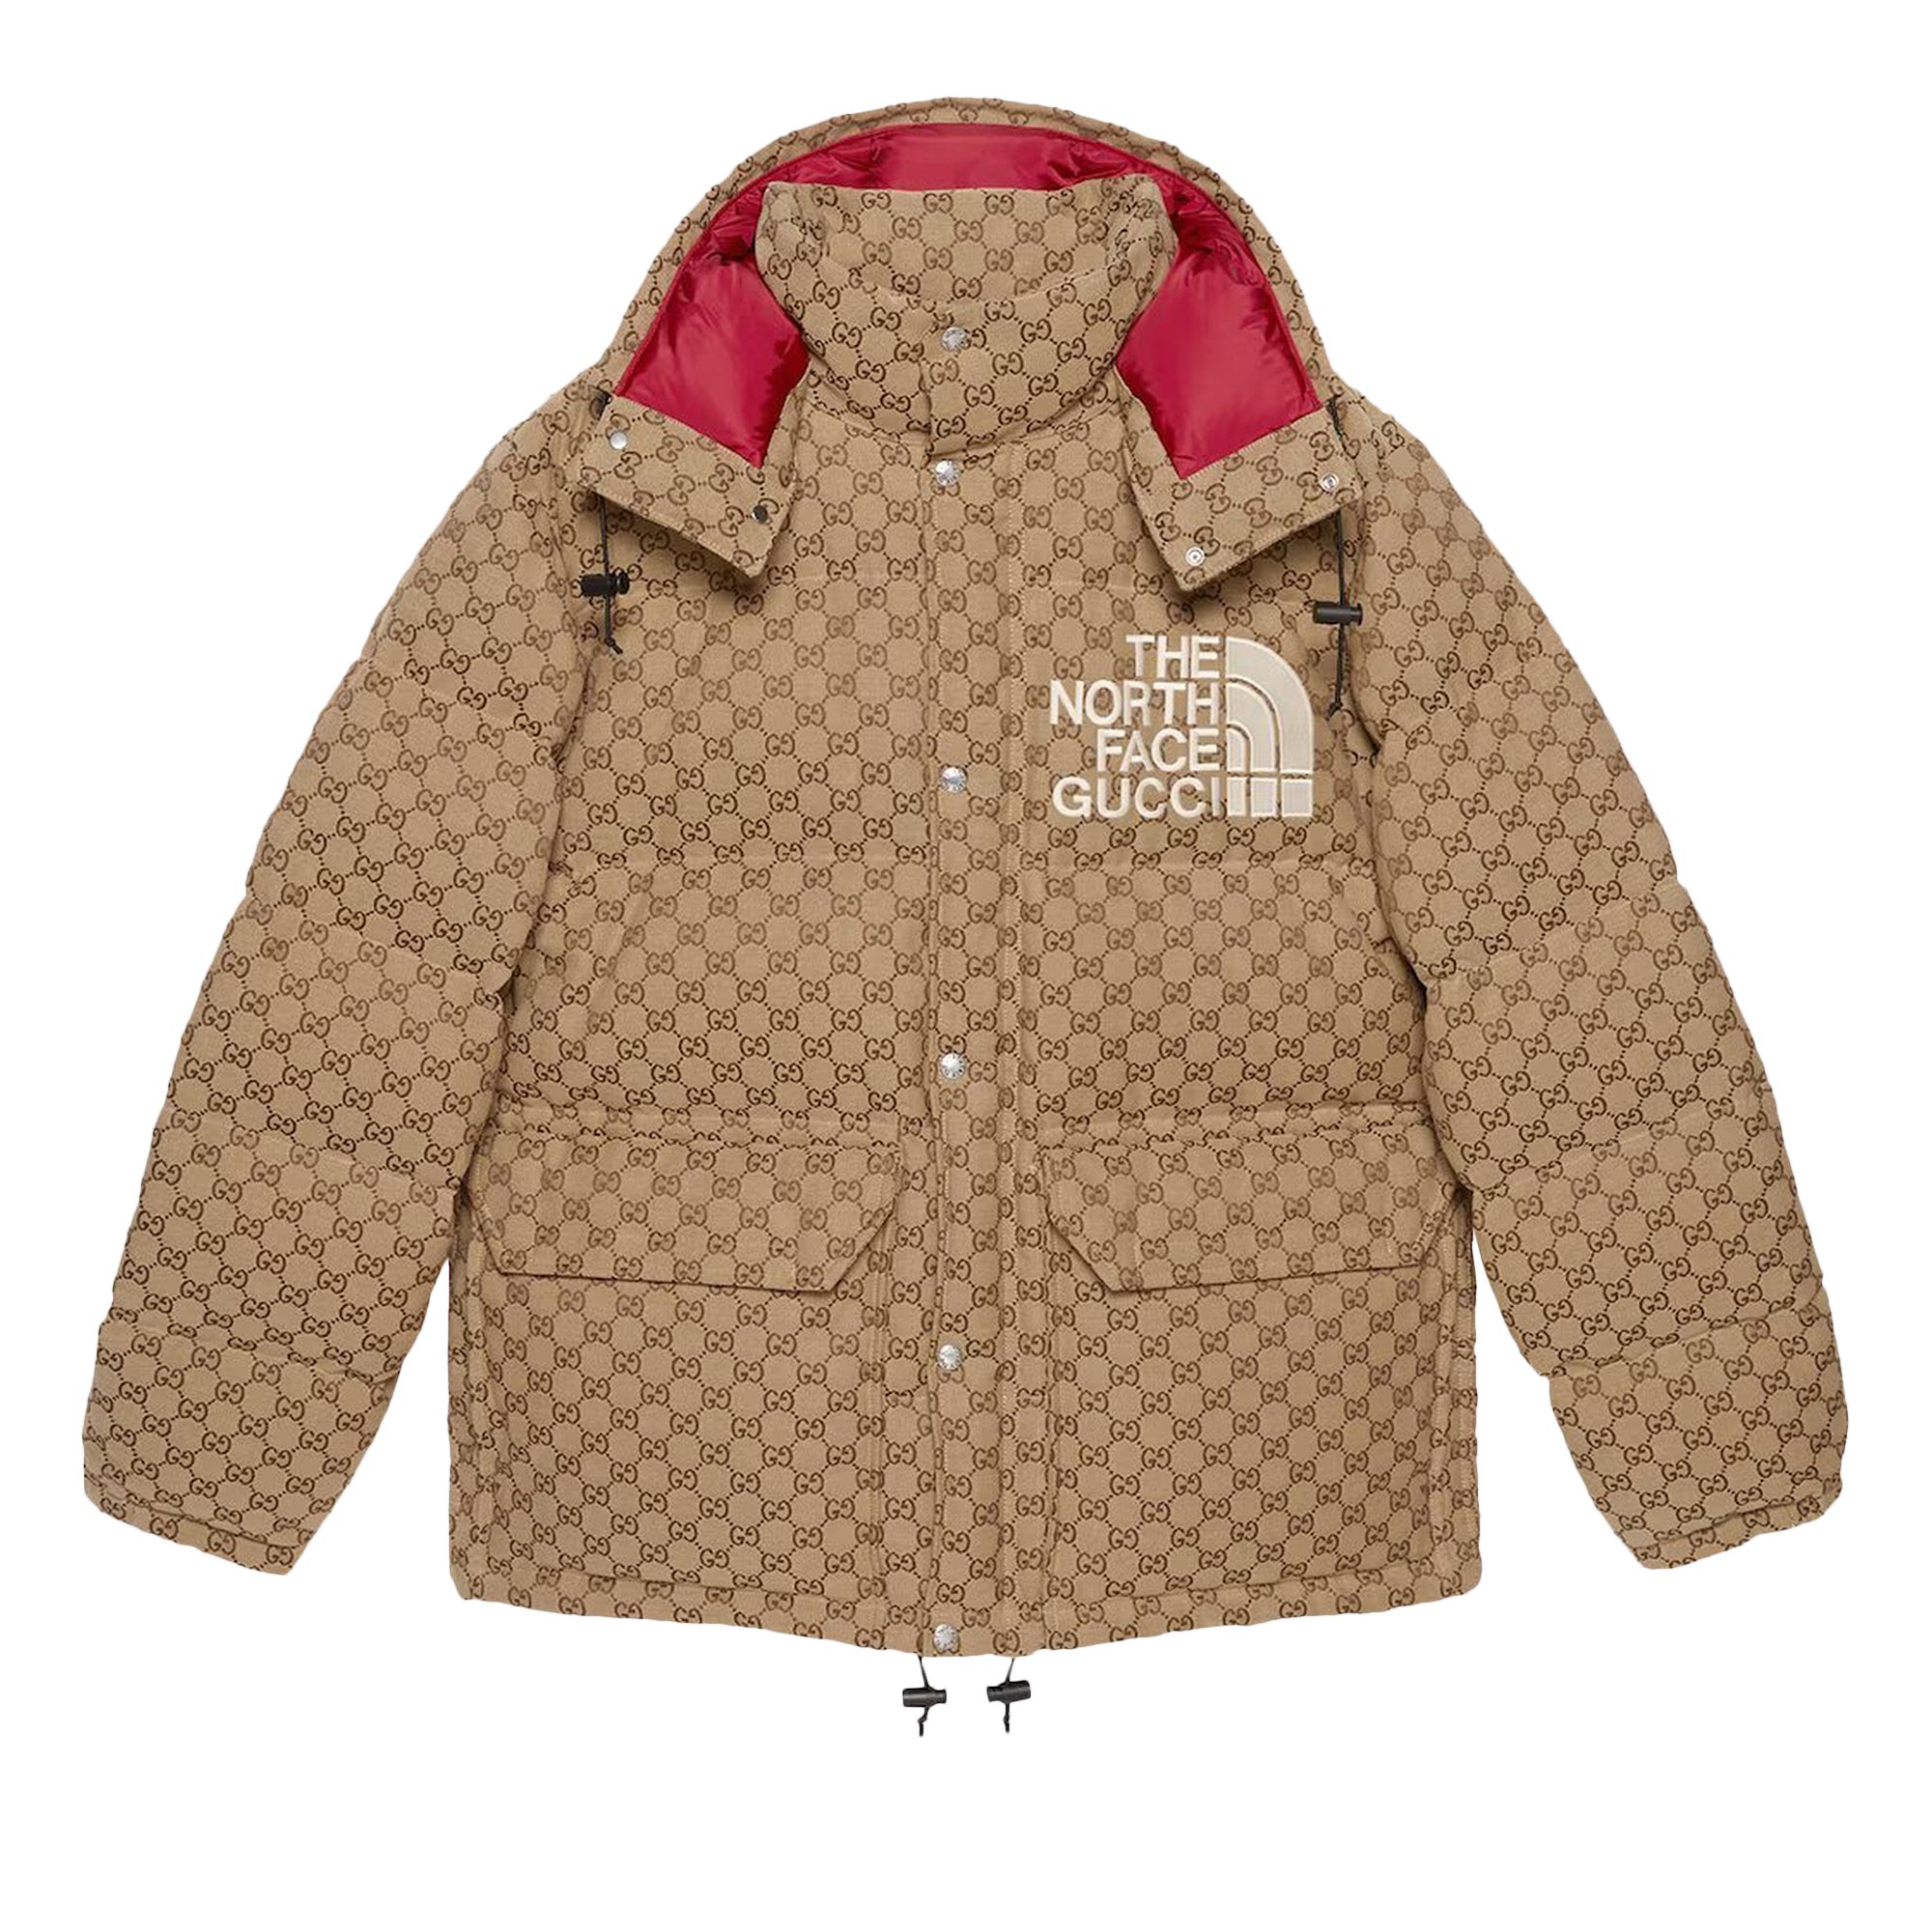 Buy Gucci x The North Face Padded Jacket 'Beige/Ebony' - 670766 